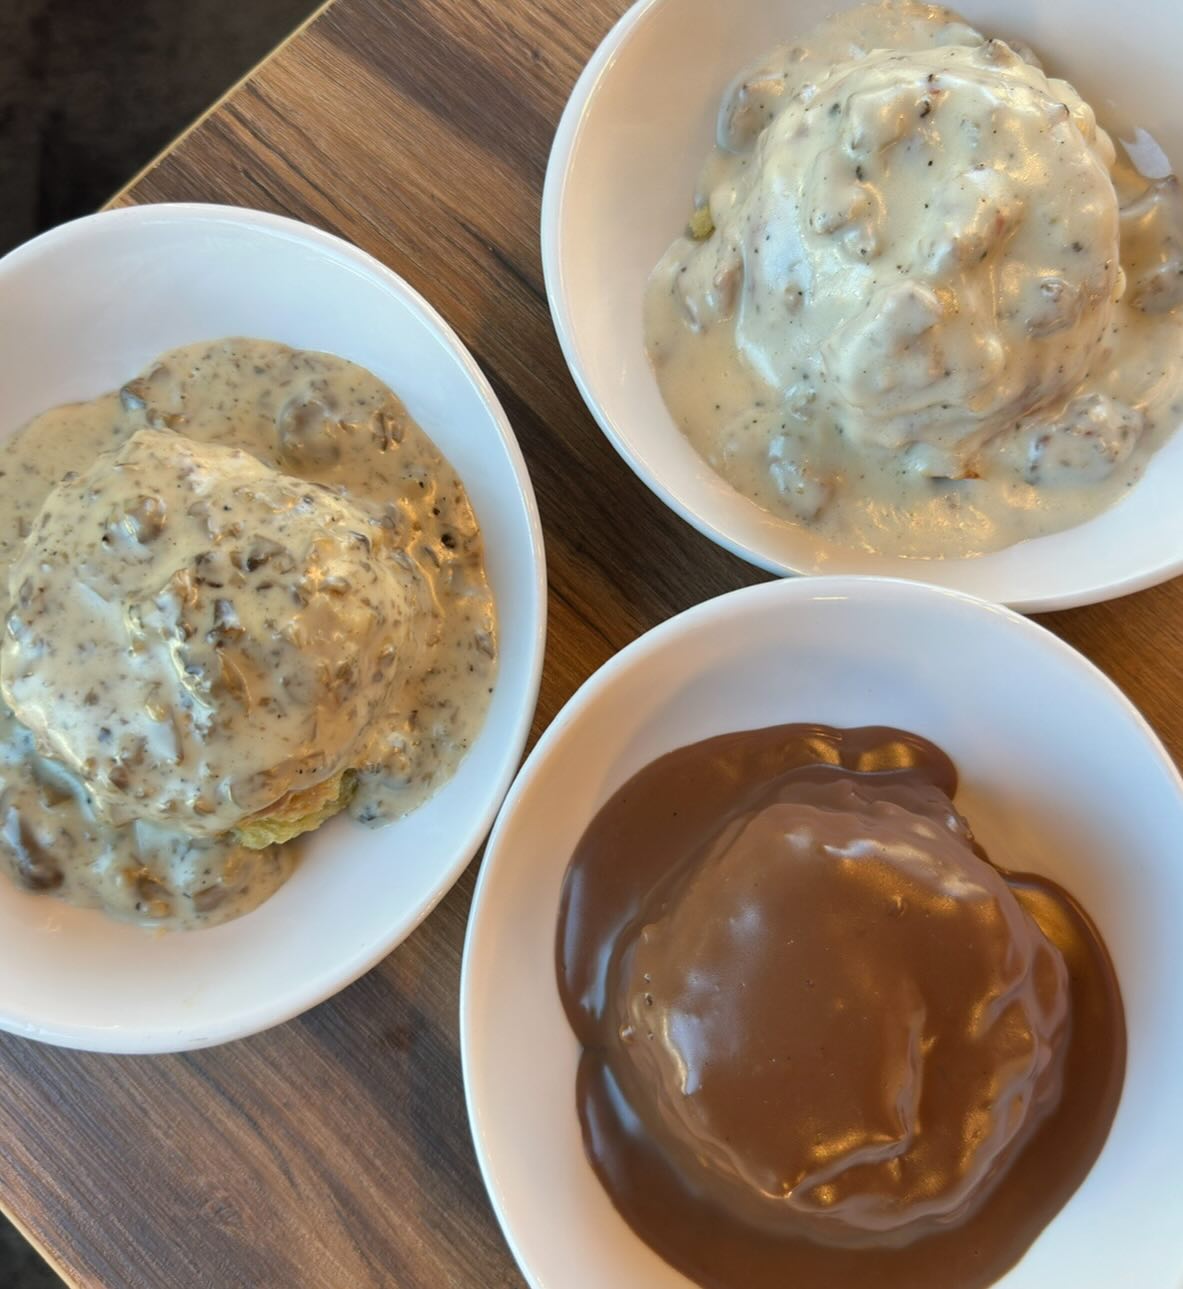 A flight of biscuits and gravy from JW's Kitchen